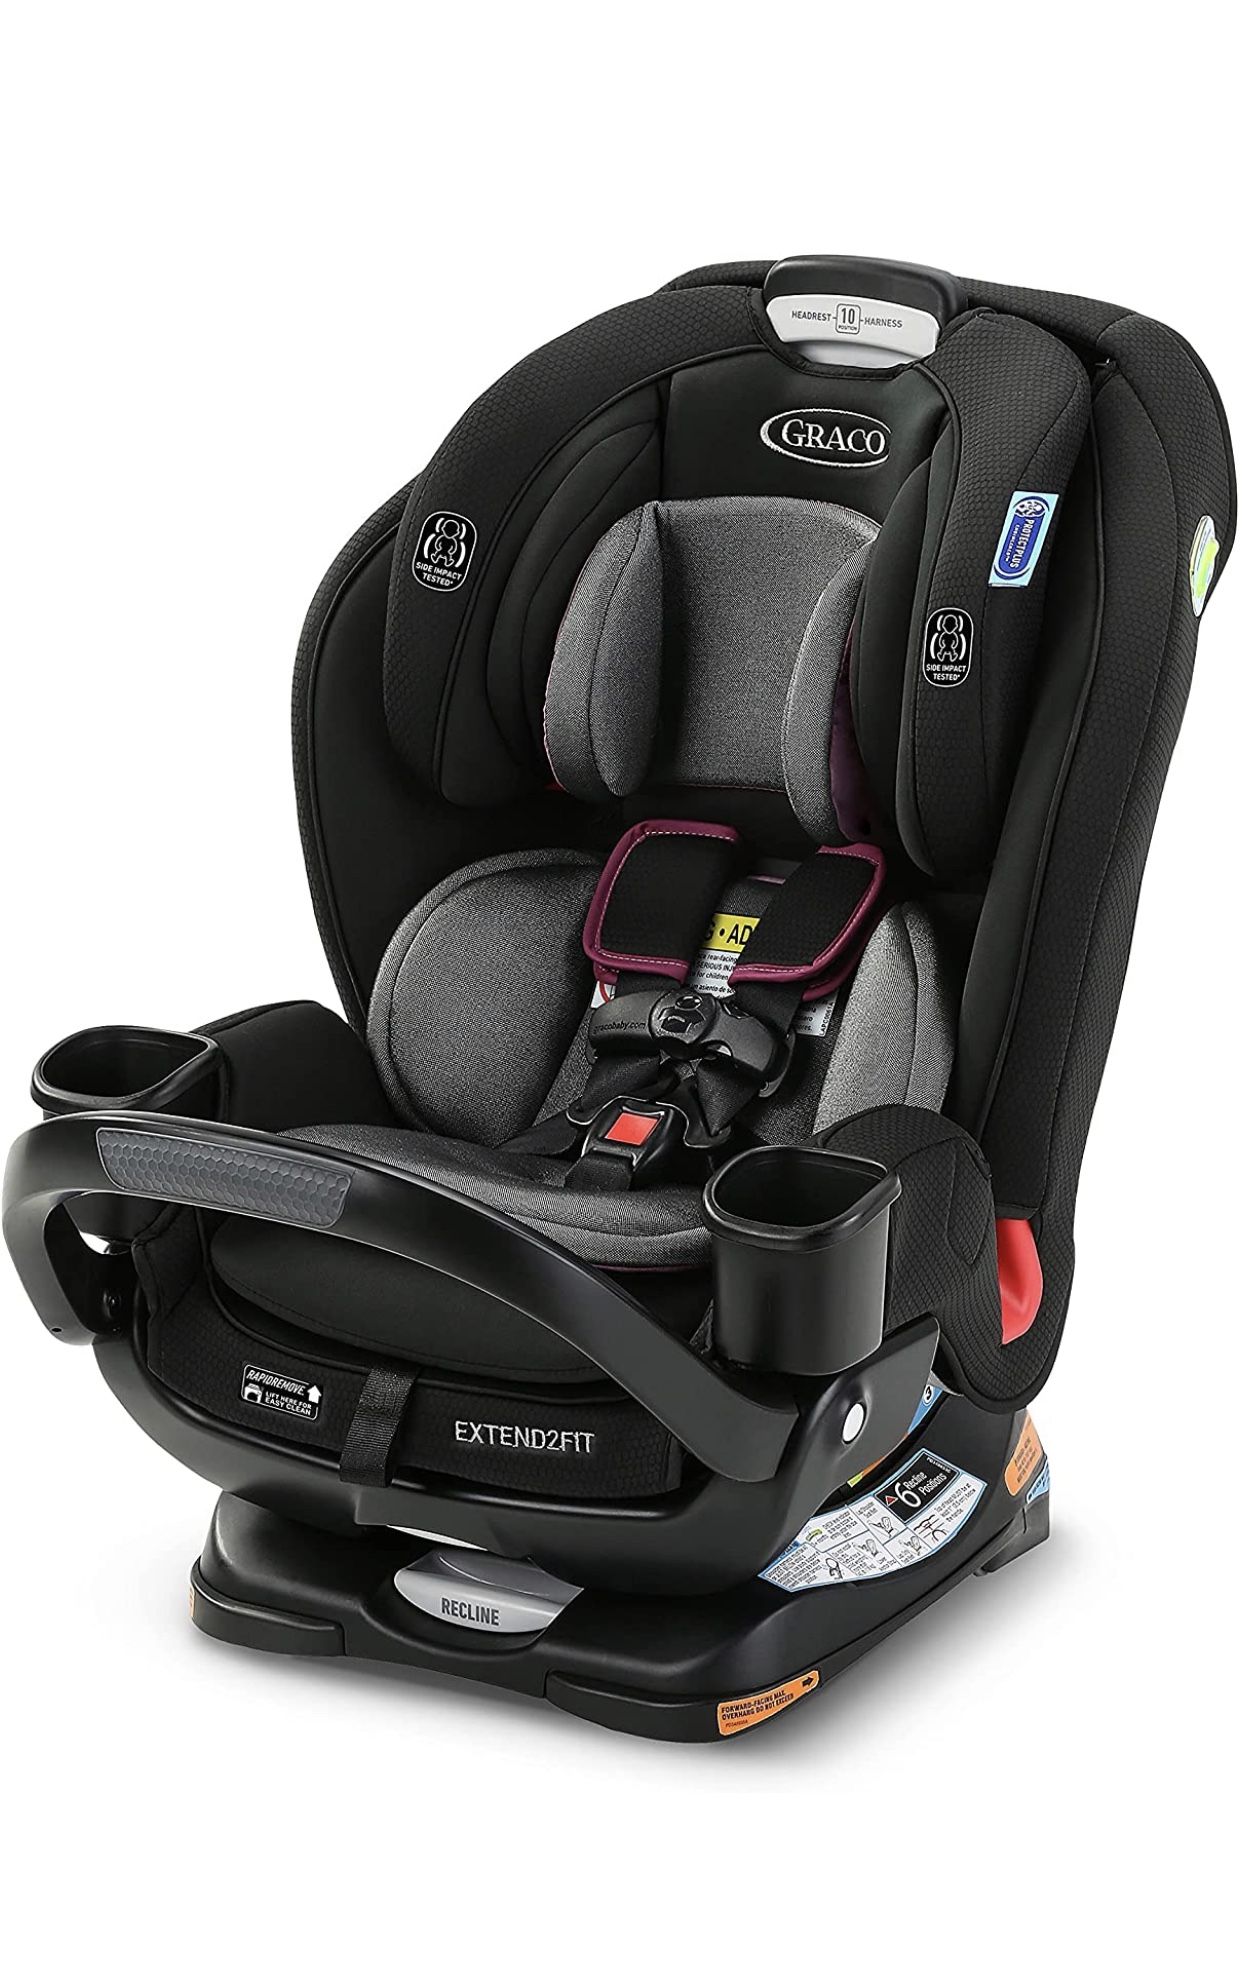 Graco Extend2Fit 3 in 1 Car Seat Featuring Anti-Rebound Bar